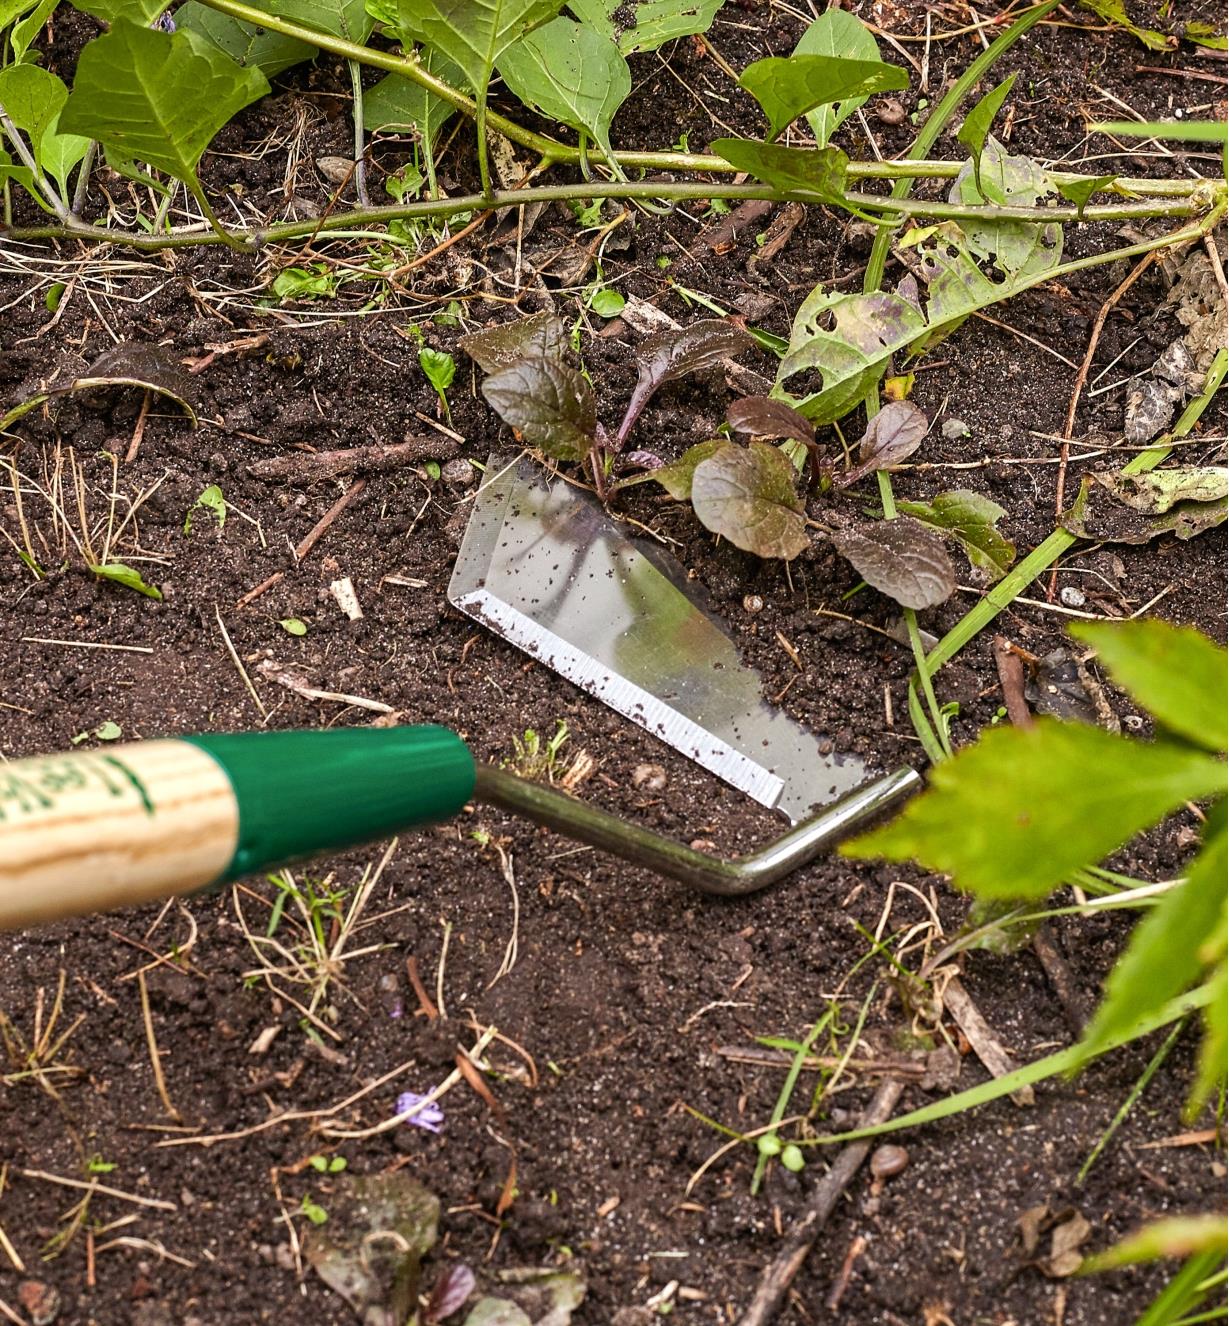 Close-up of swoe blade cutting weeds in a garden